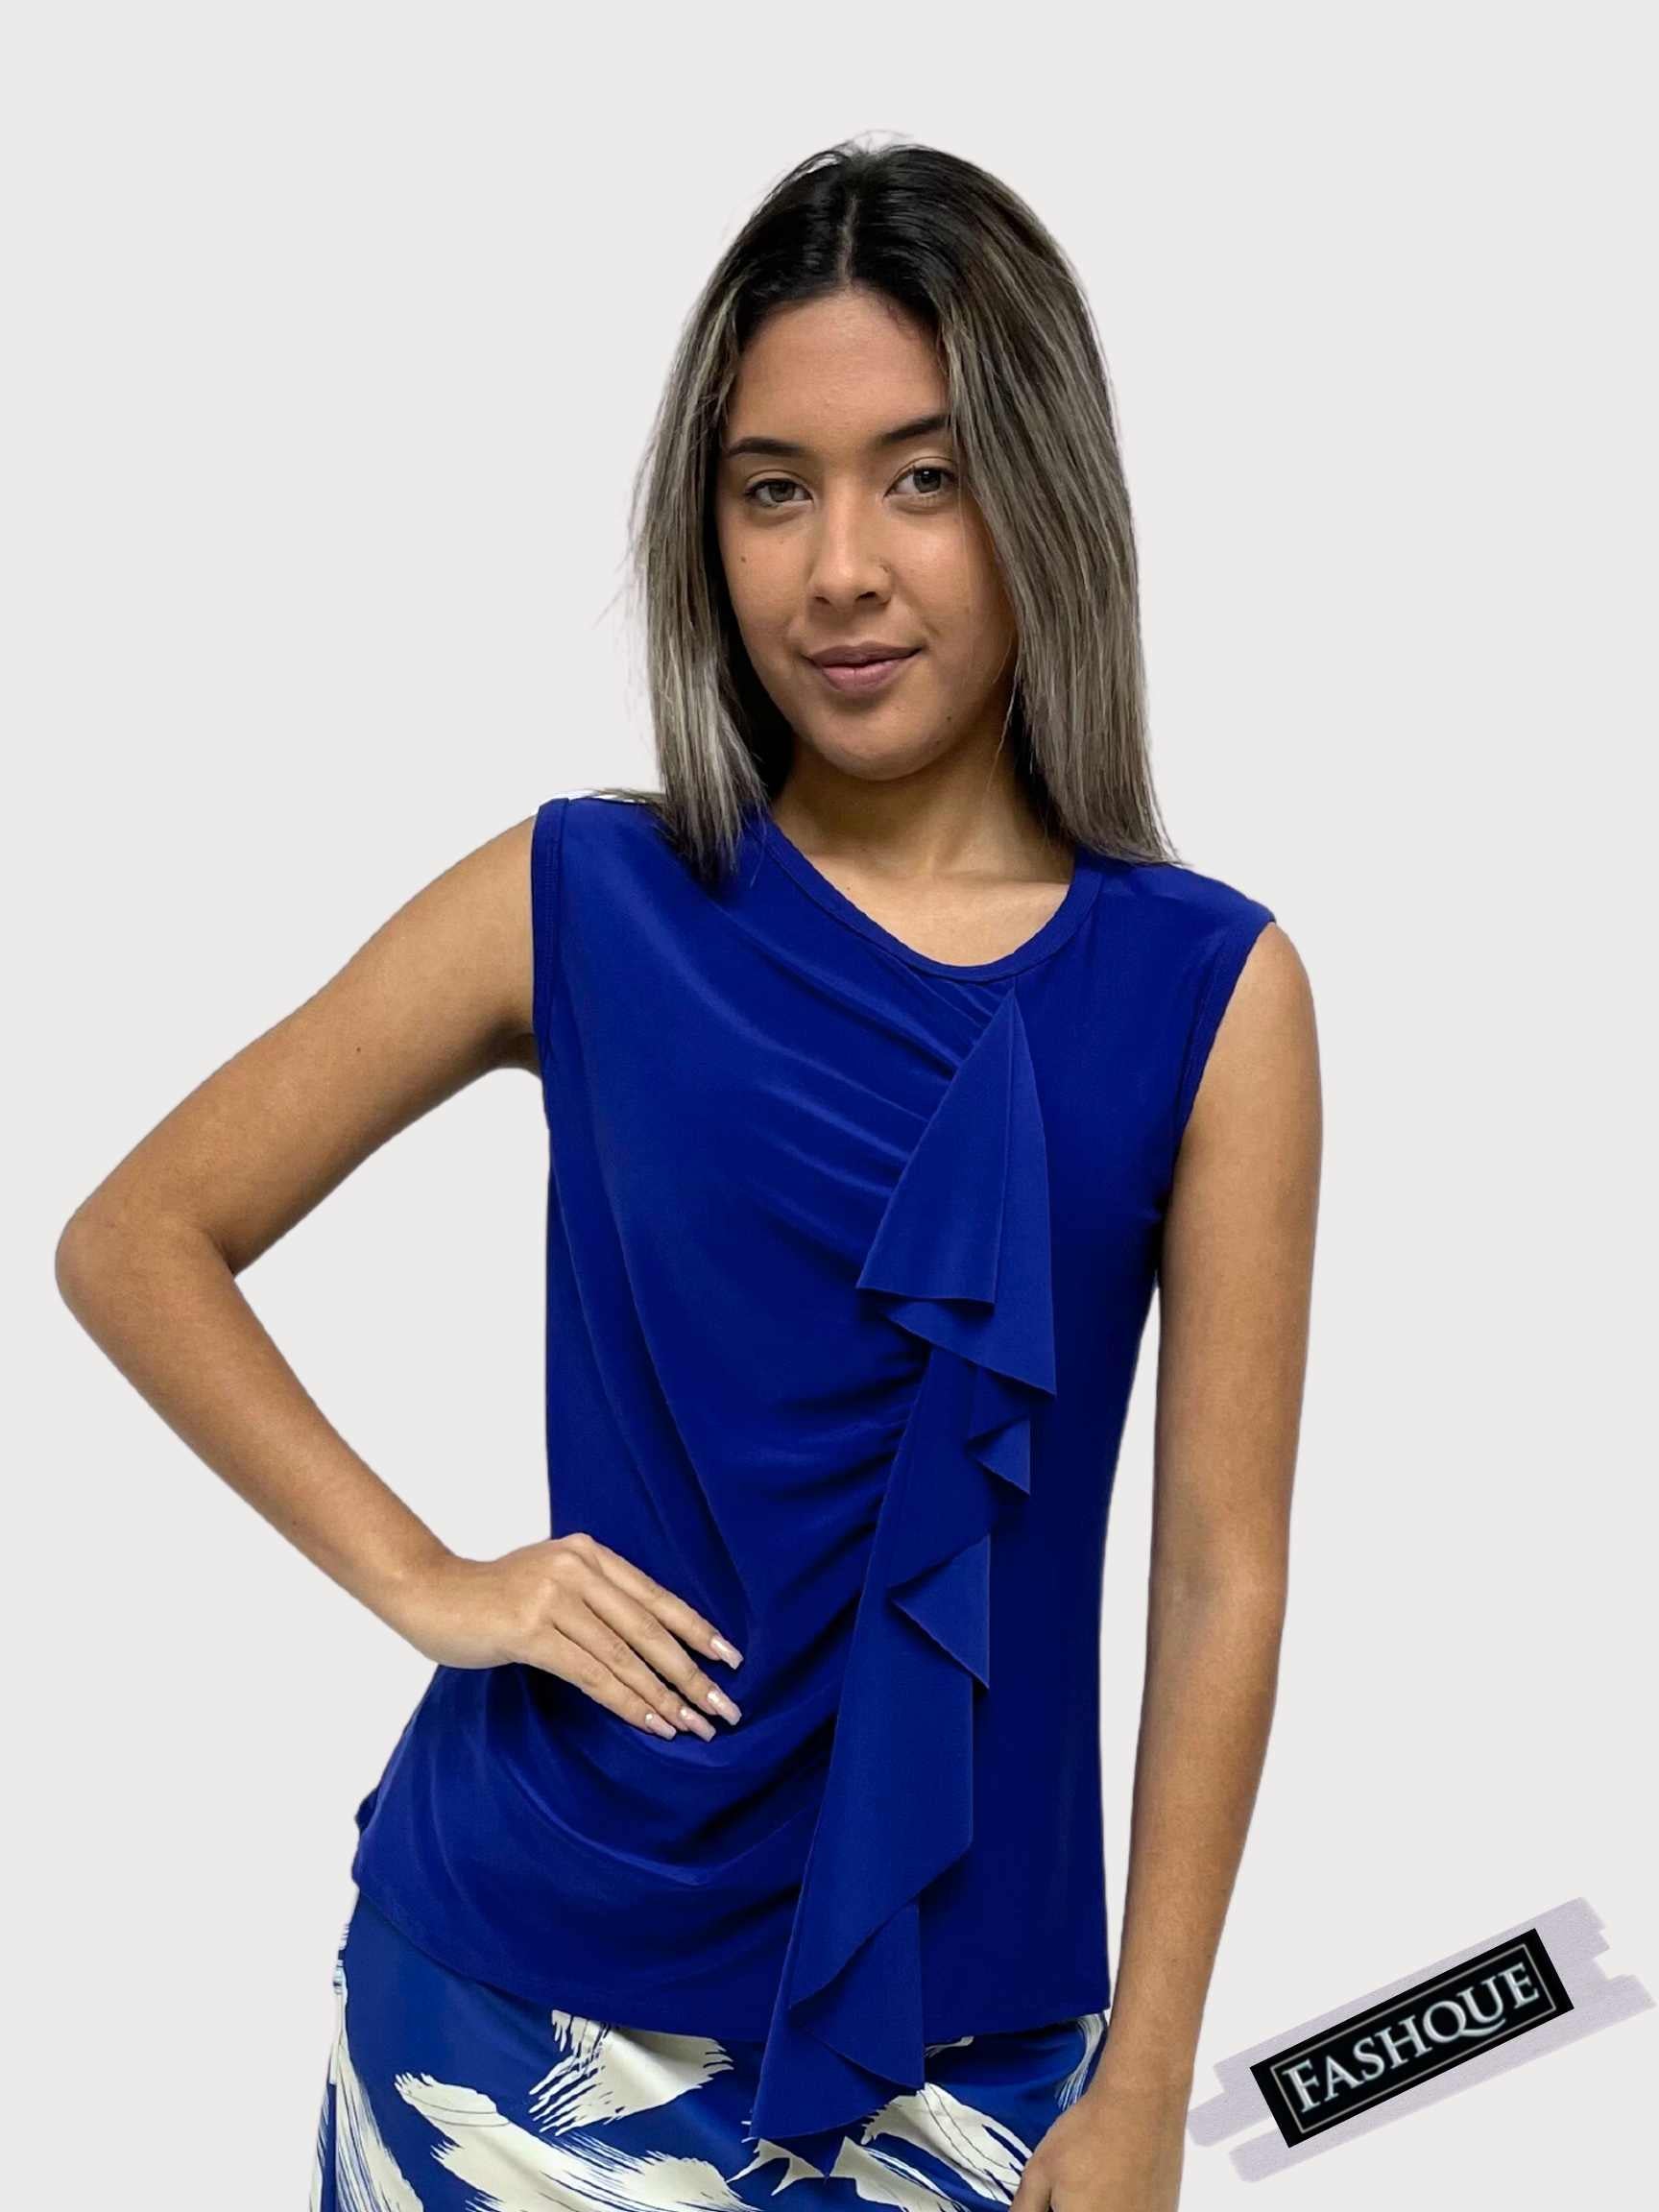 FASHQUE - Round neck Ruffle on side sleeveless with rushing Top - T456 Sale